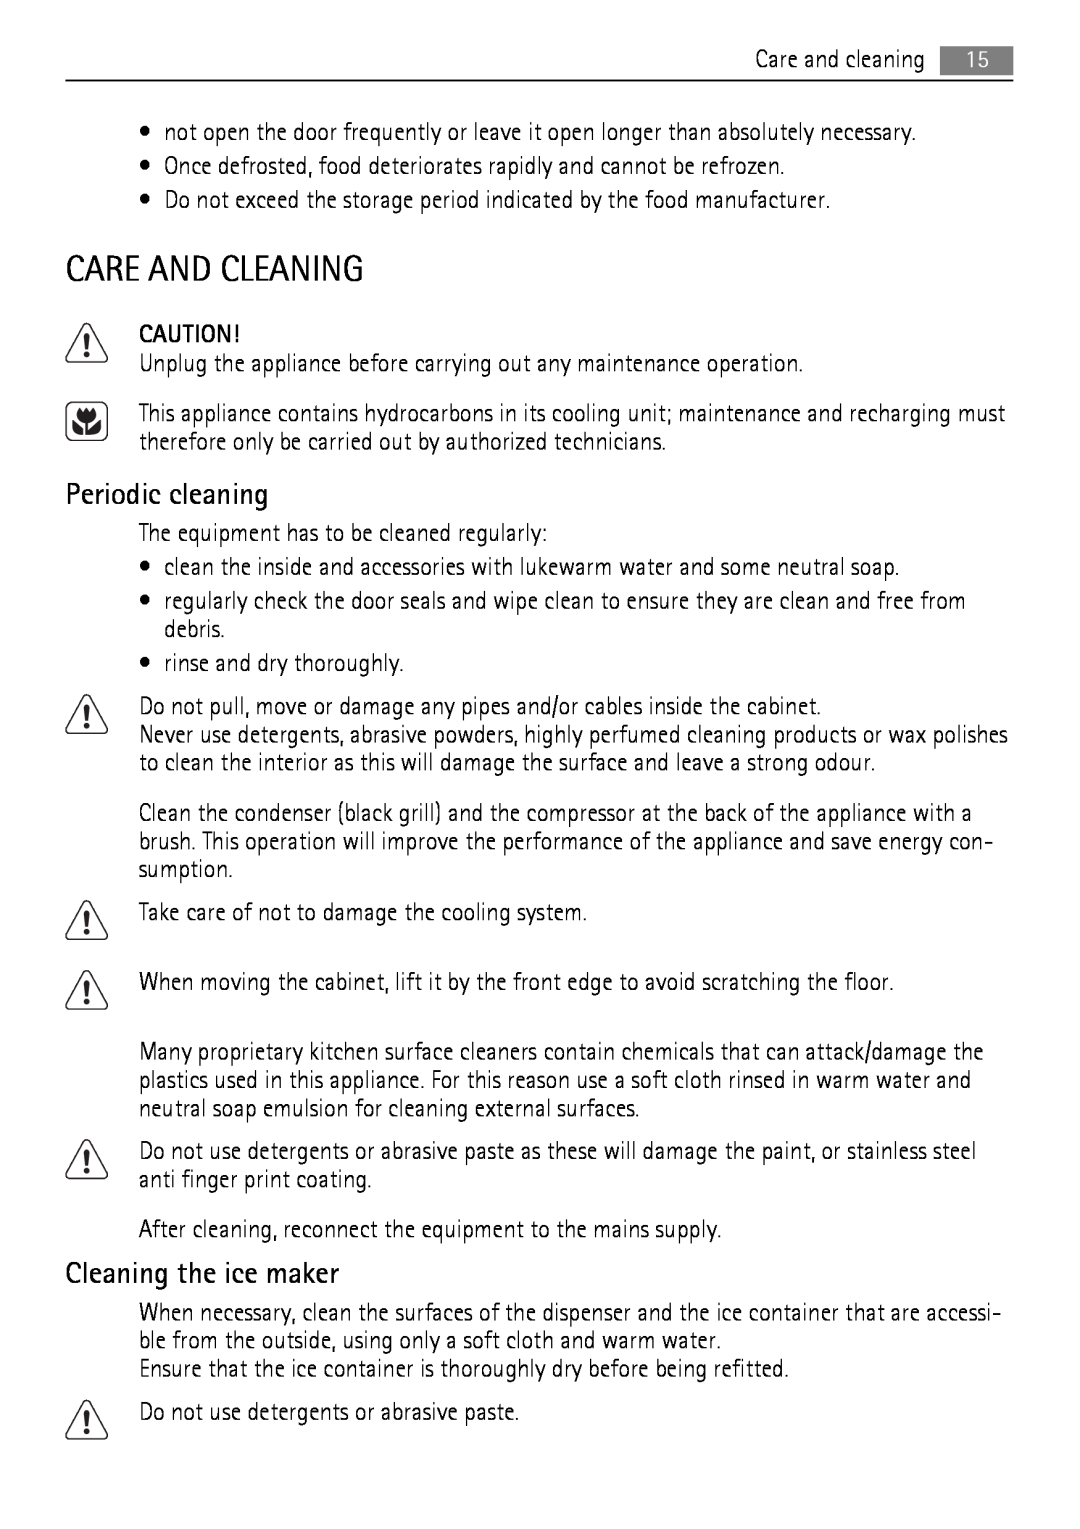 AEG A92860GNX0 user manual Care And Cleaning, Periodic cleaning, Cleaning the ice maker 